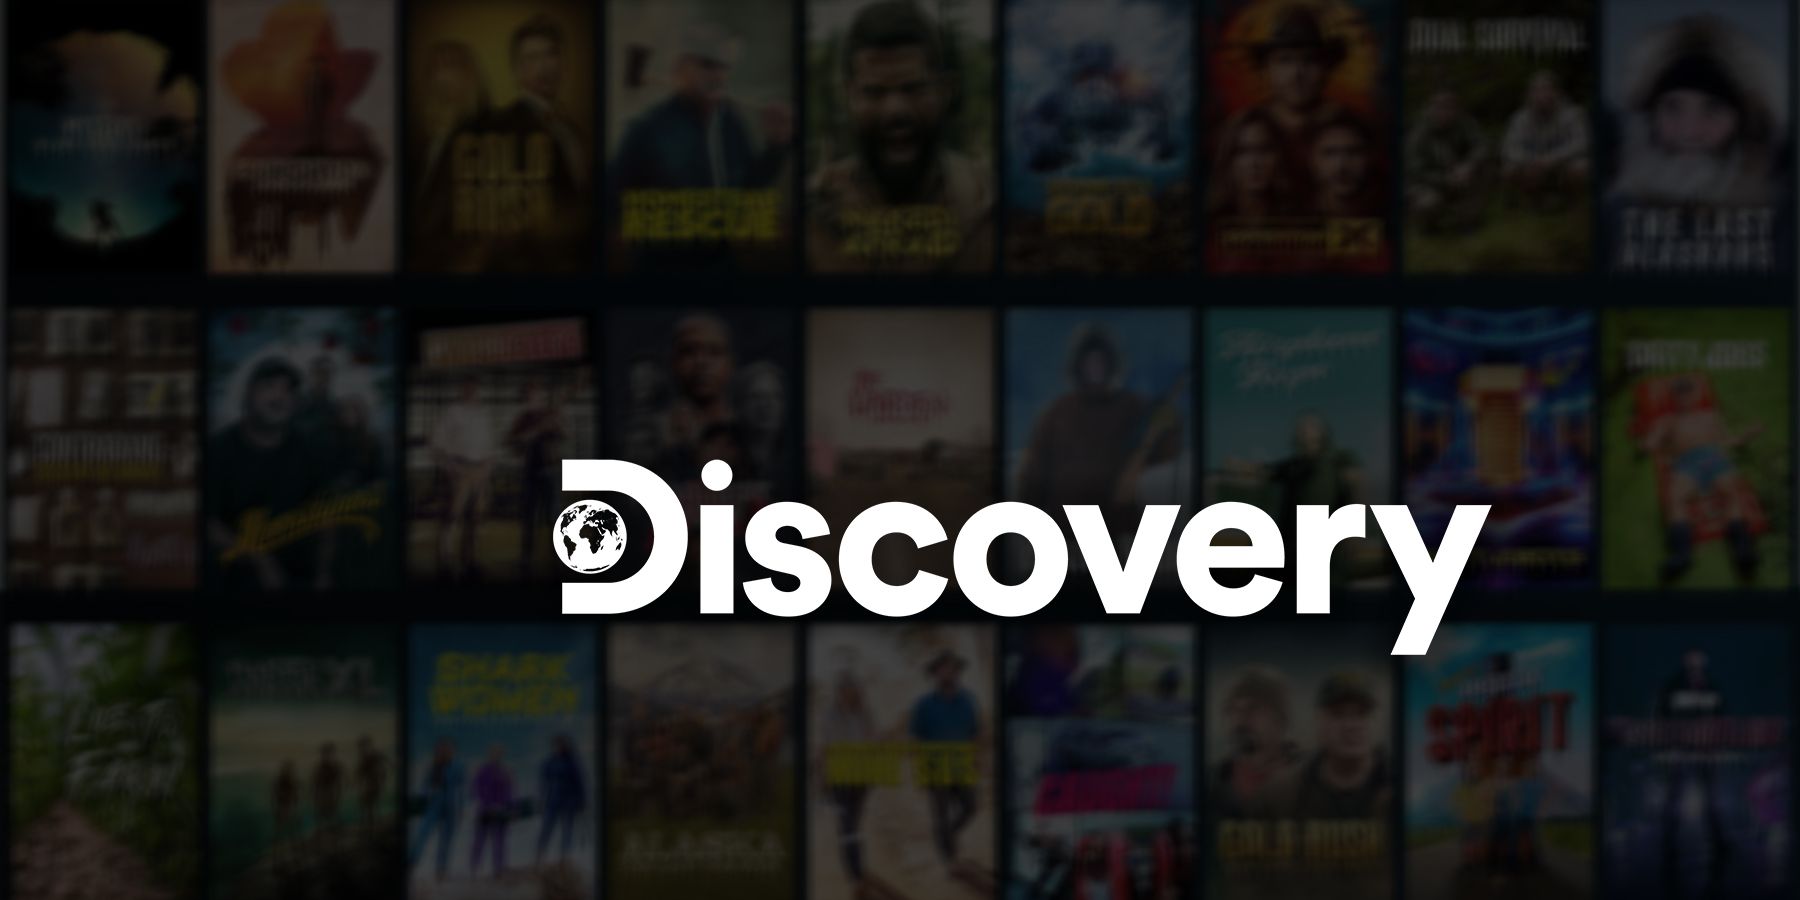 discovery channel show montage and logo